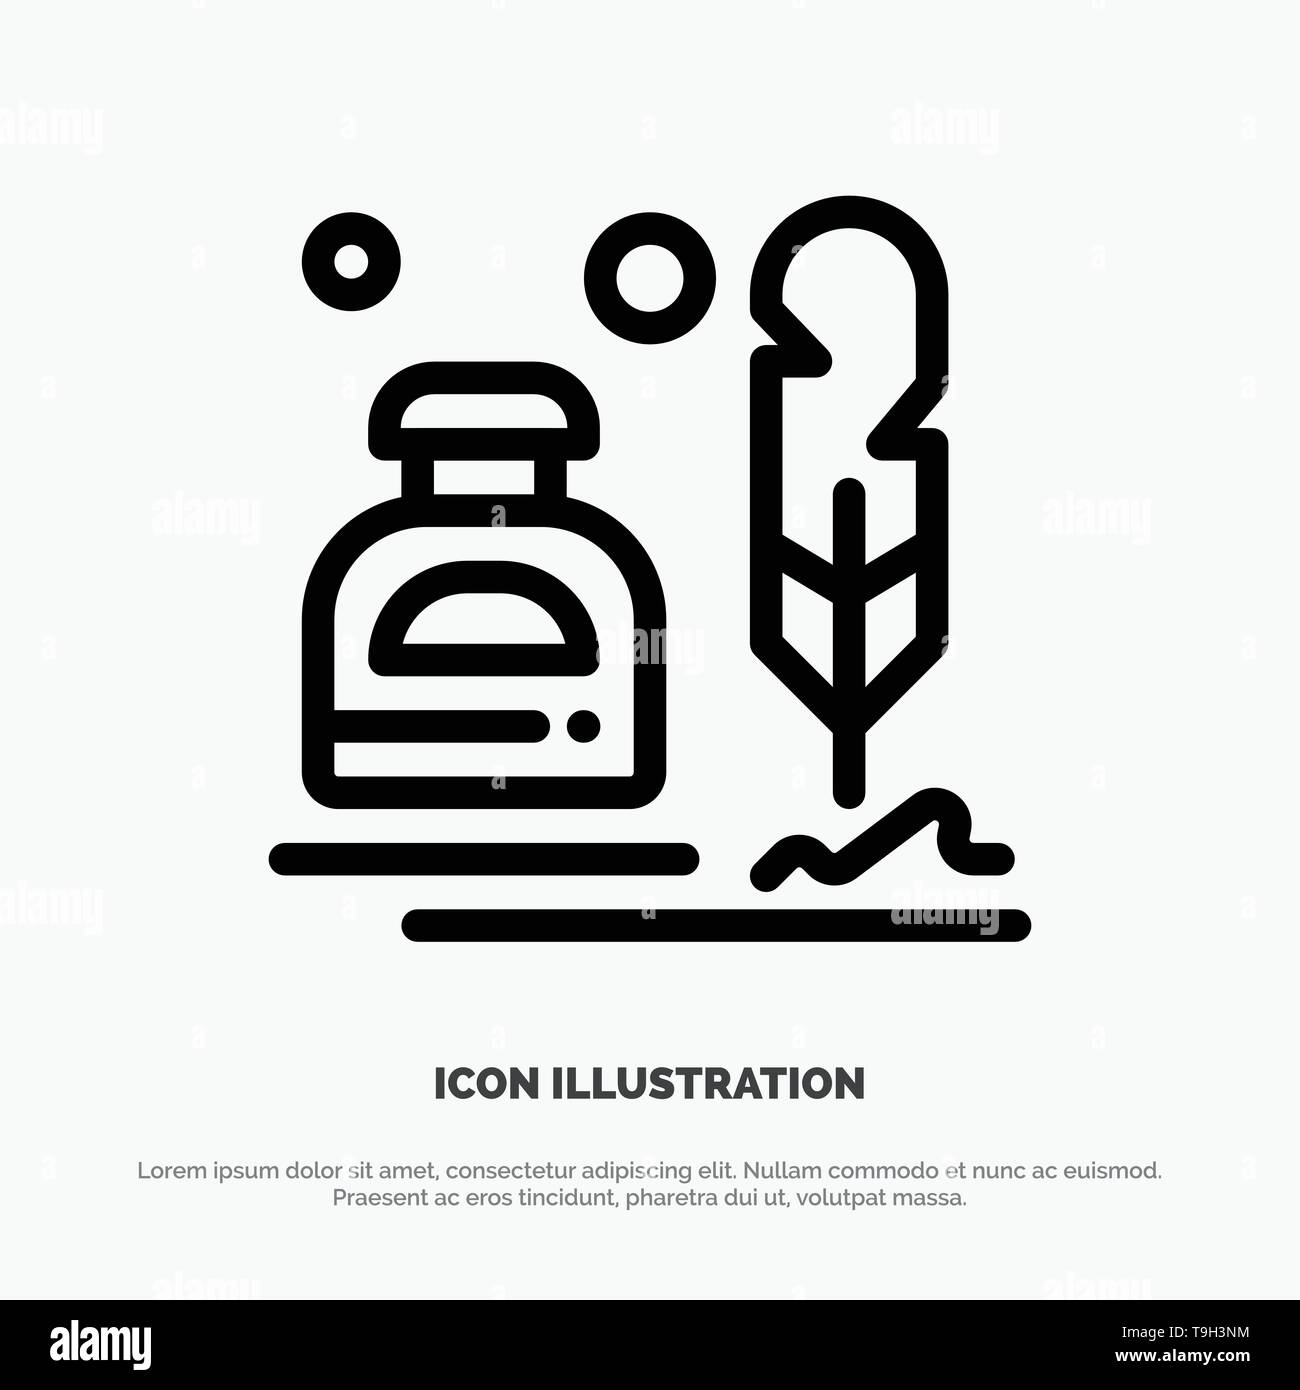 Ink, Erite, Fur, Letter, Office, Line Icon Vector Stock Vector